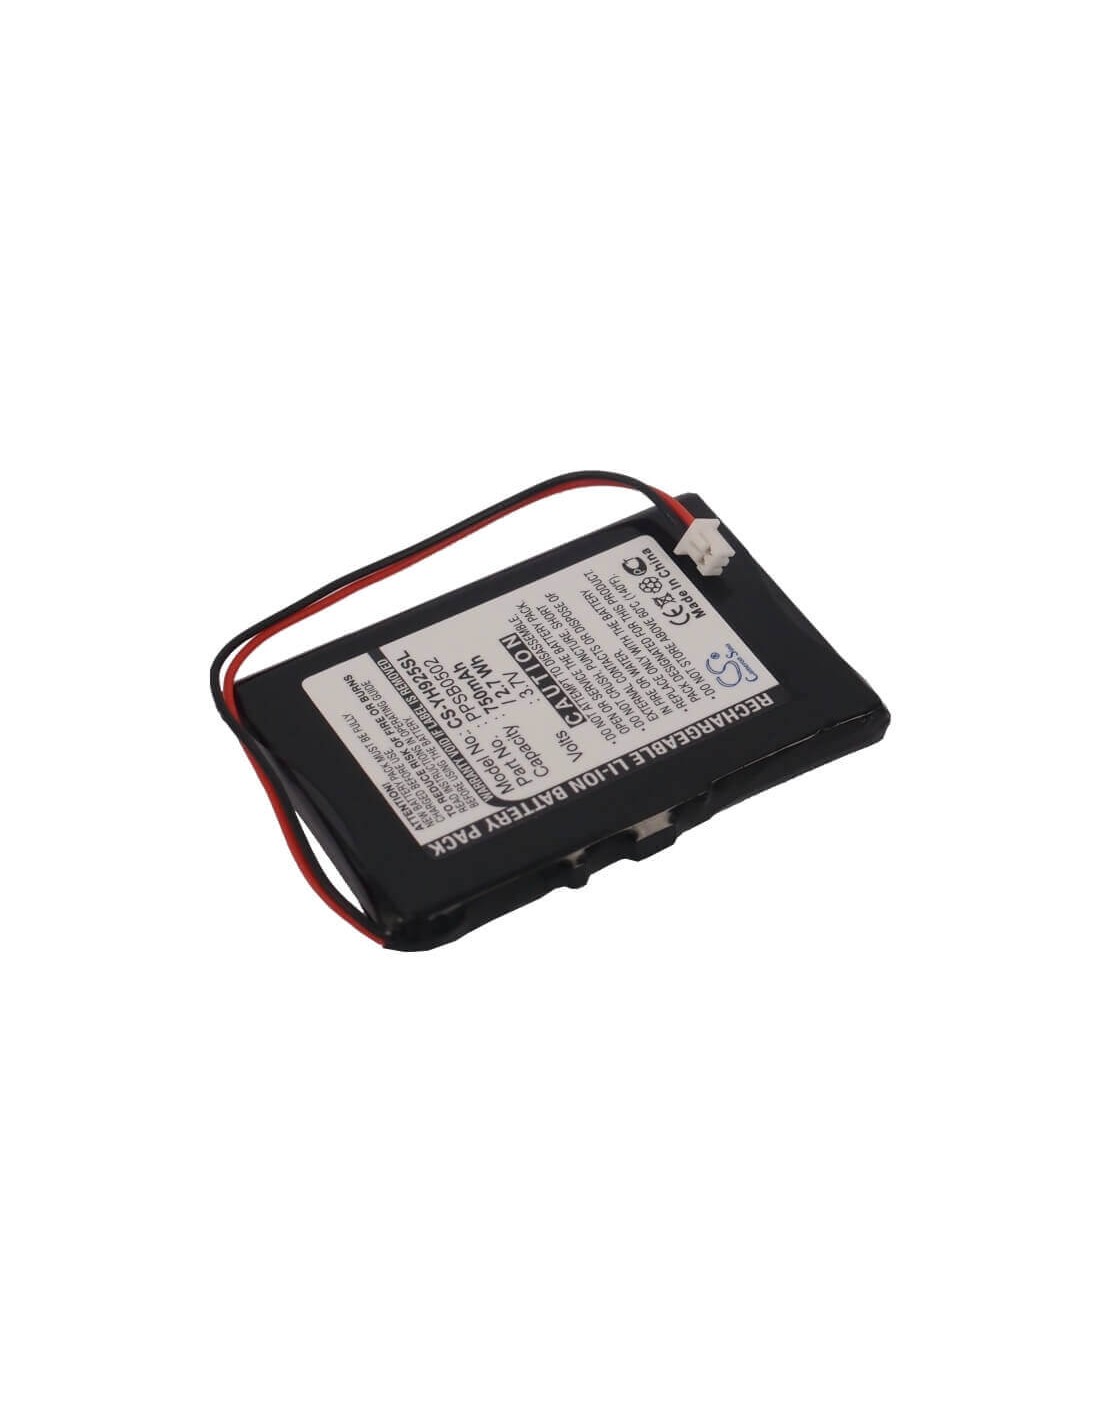 Battery for Samsung Yh-920, Yh-925 Mp3 Player 3.7V, 750mAh - 2.78Wh